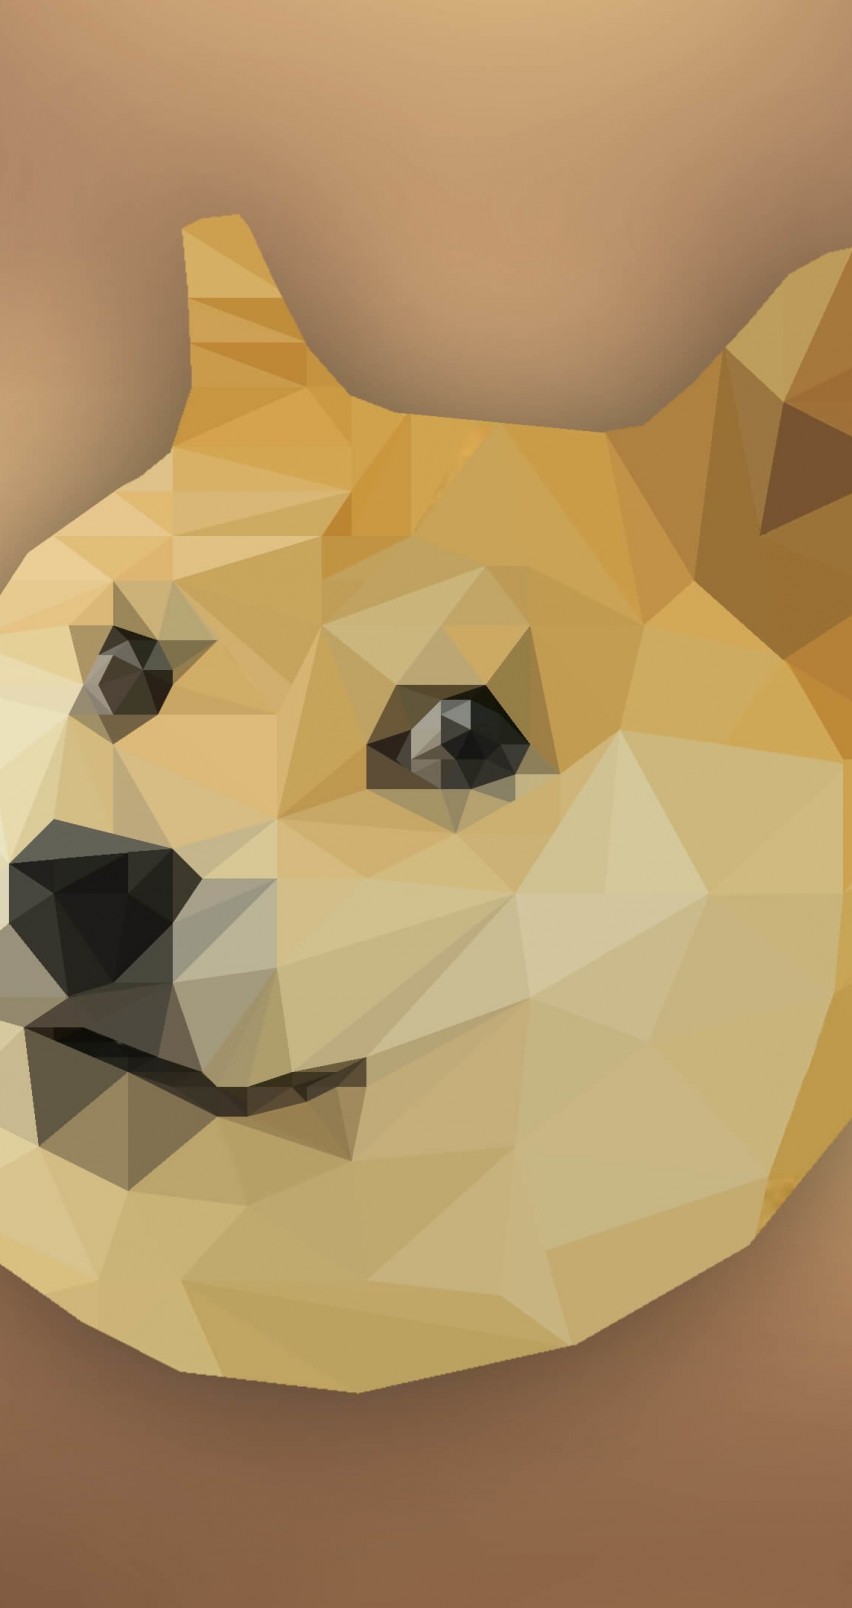 Low Poly Doge Wallpaper for Apple iPhone 6 / 6s